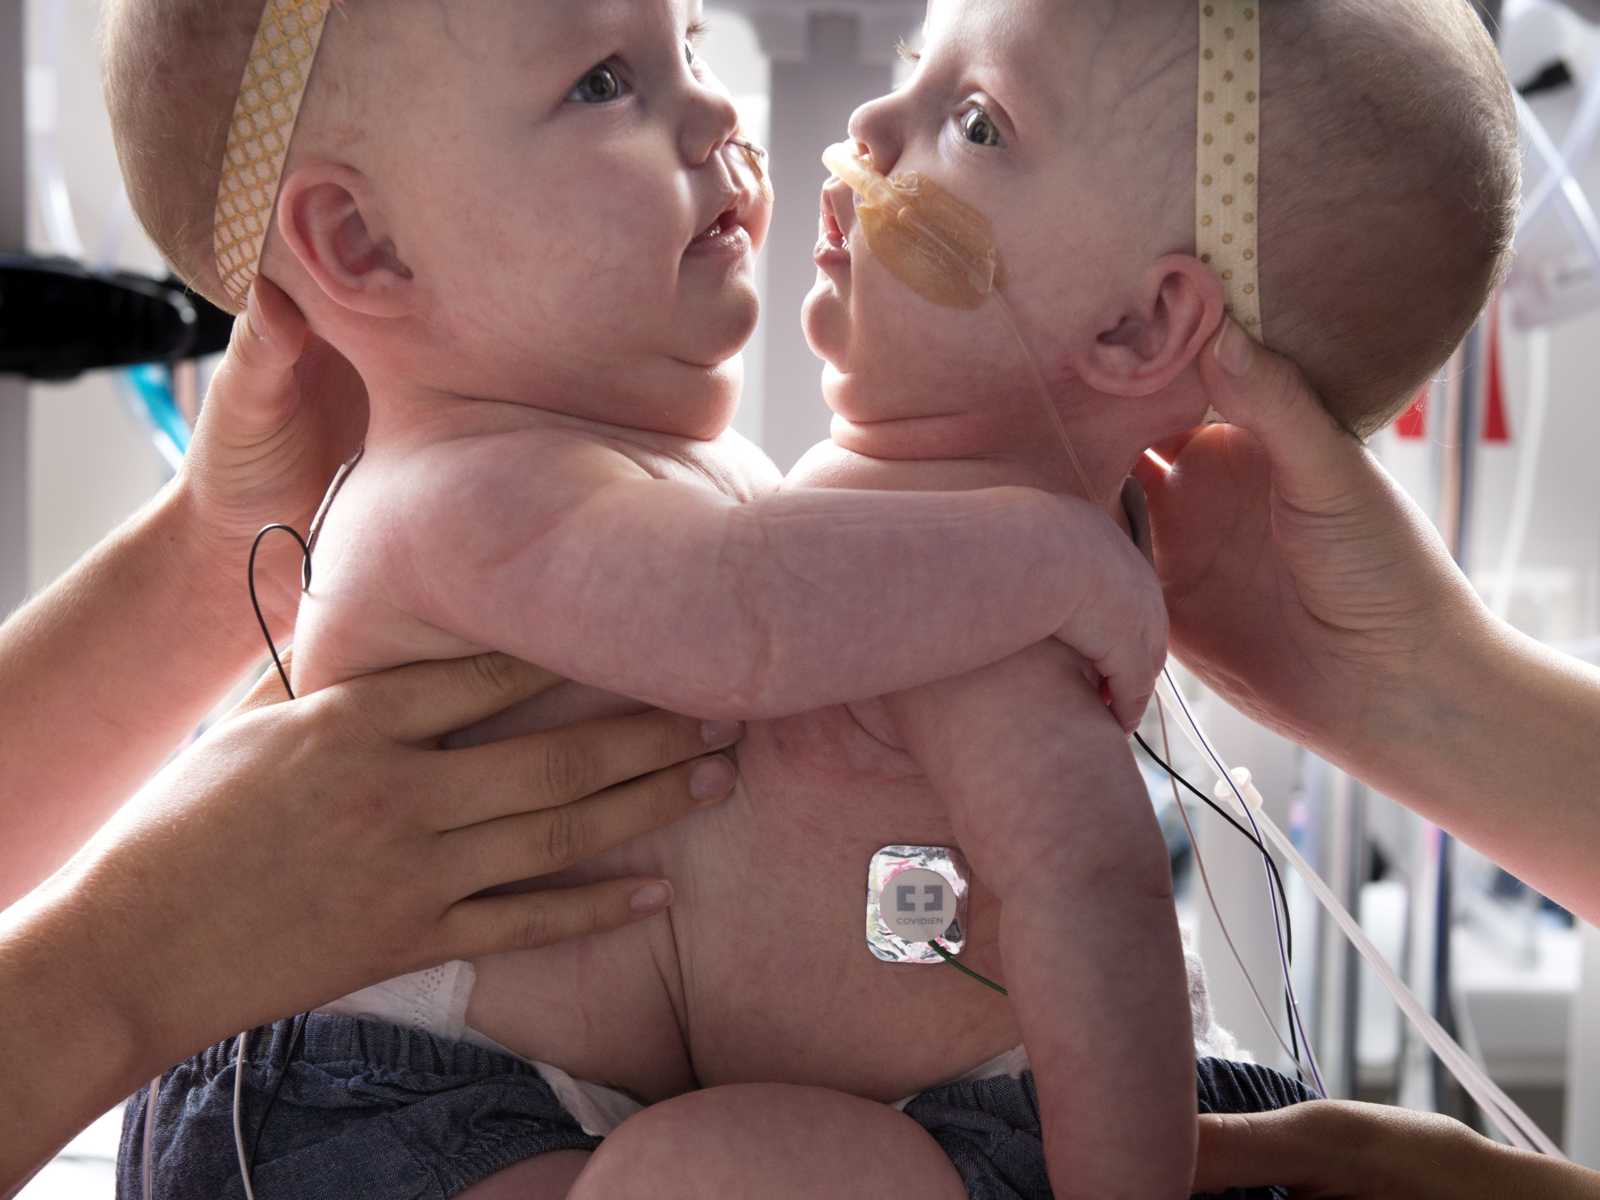 newborn conjoined twins attached at the chest being supported at the head by hands 